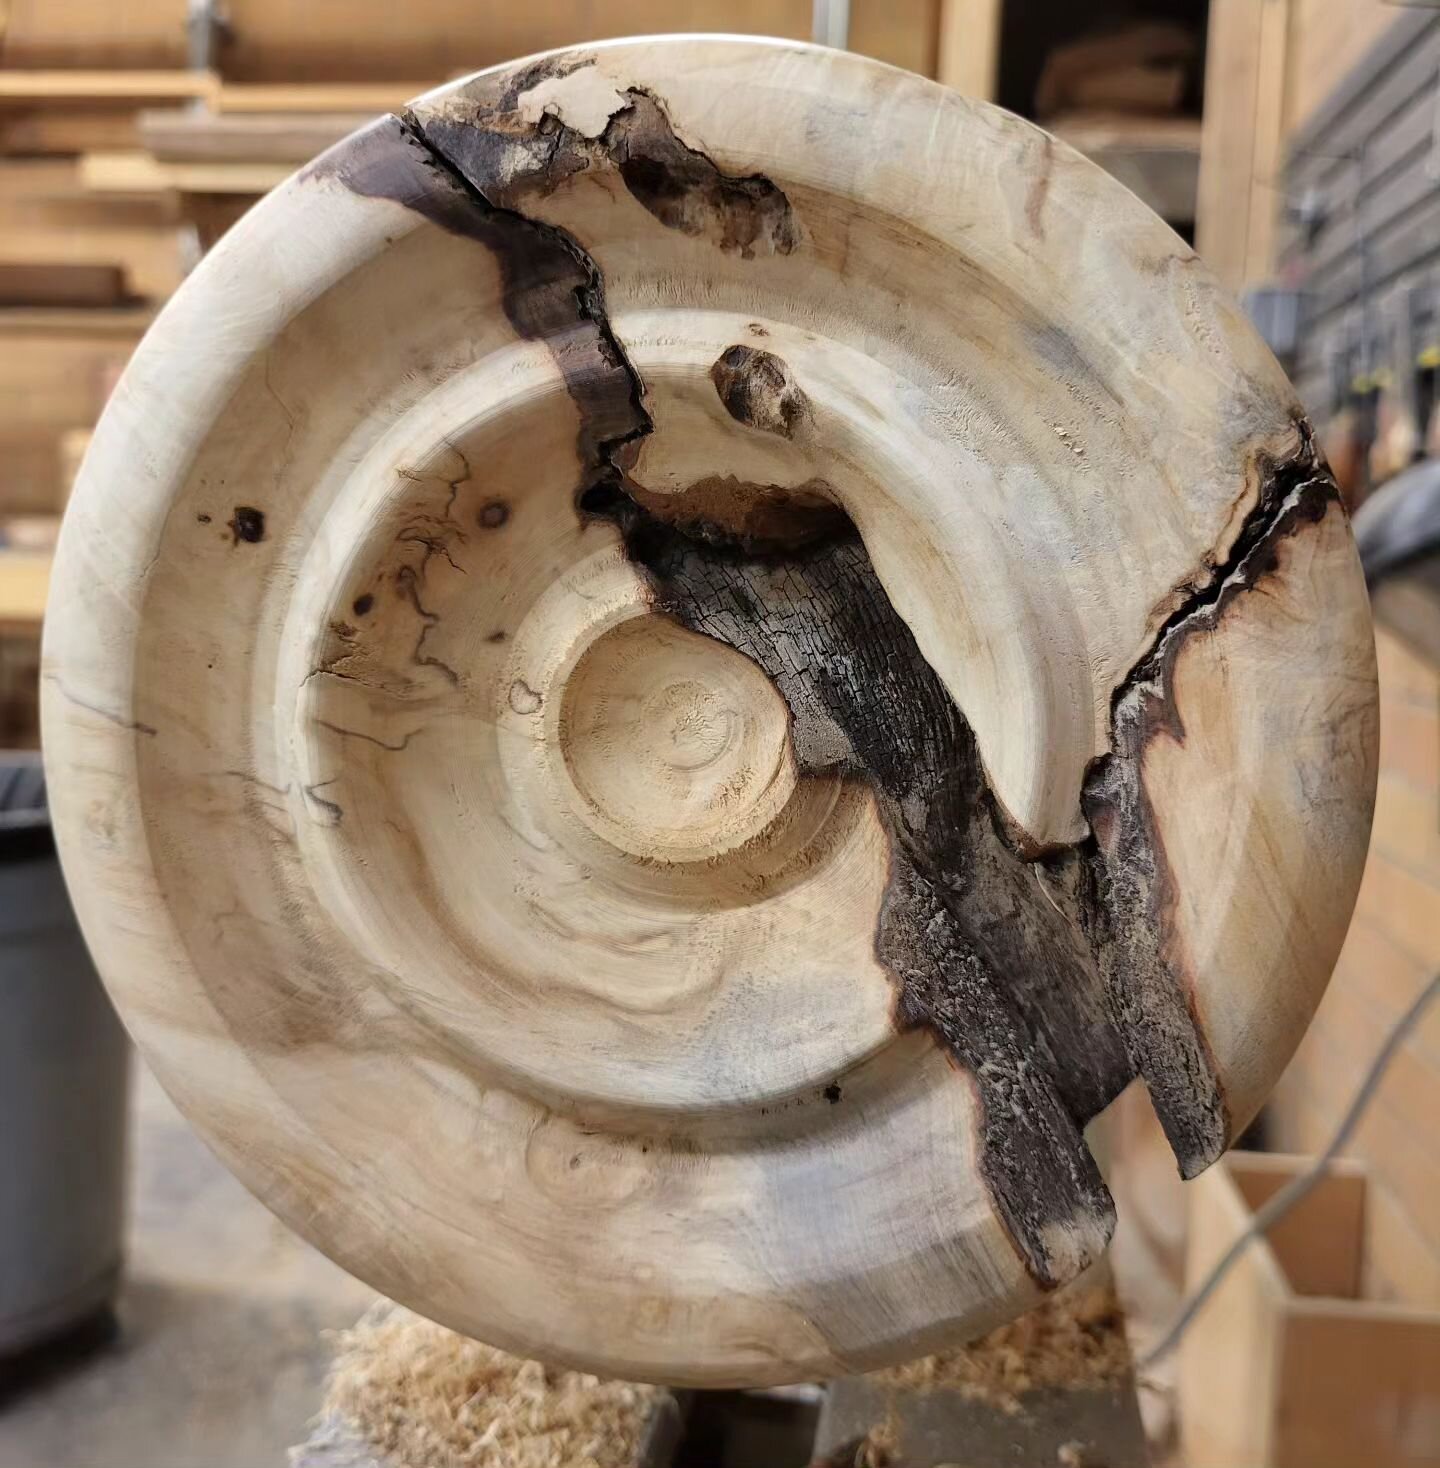 Fissures.

Absolutely loving how this bark inclusion diversifies the fa&ccedil;ade of this piece. 

.
.
.

#savannahstantonllc #spalting #fracture #fissures #shopdays #woodturner #woodturning #newpiece #ogee #horsechestnut